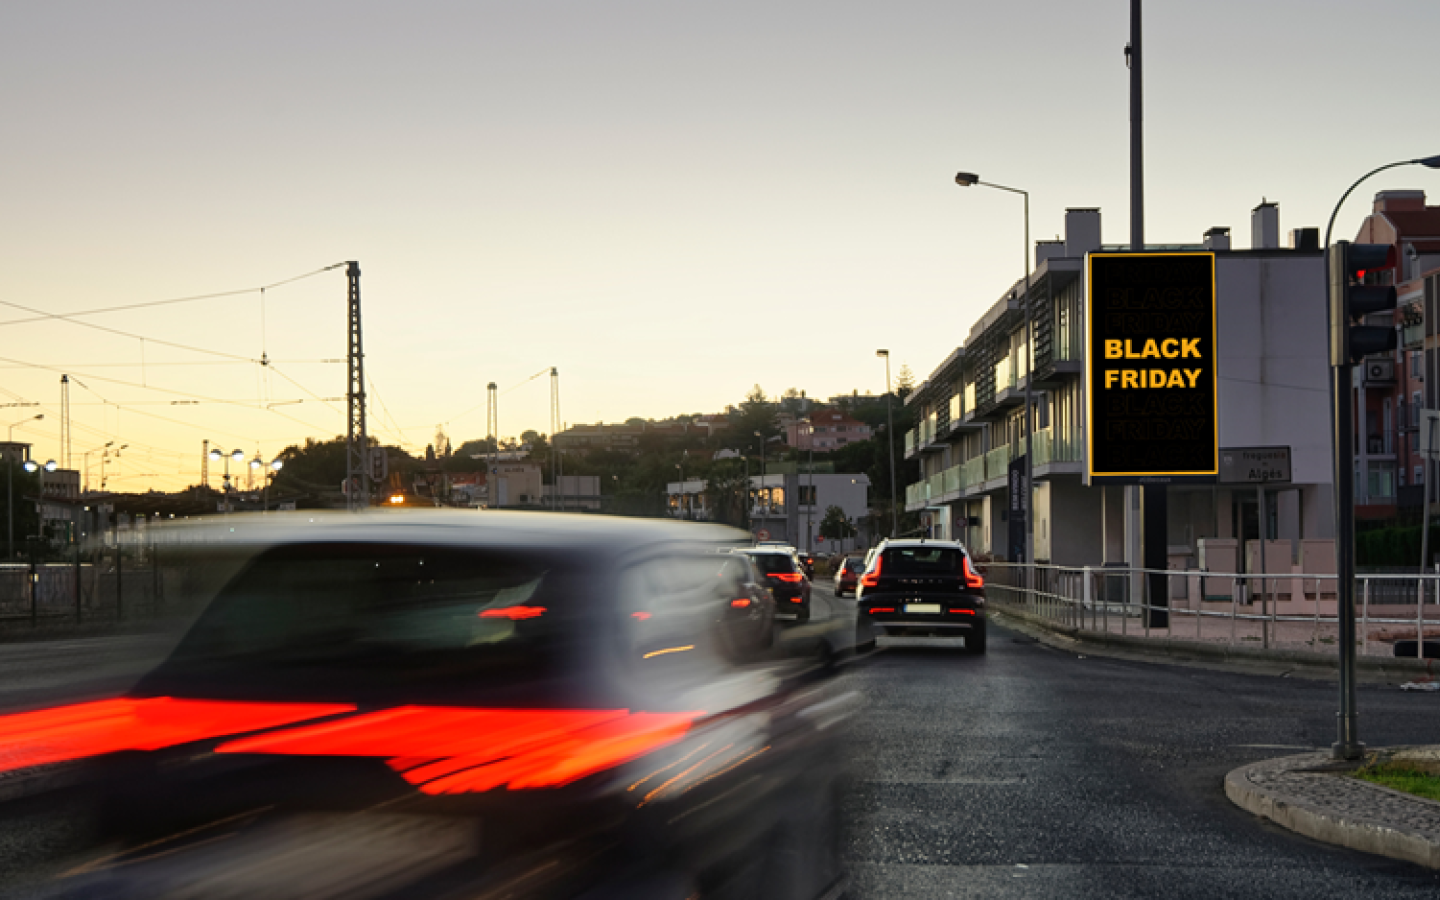 JCDecaux black friday outdoor